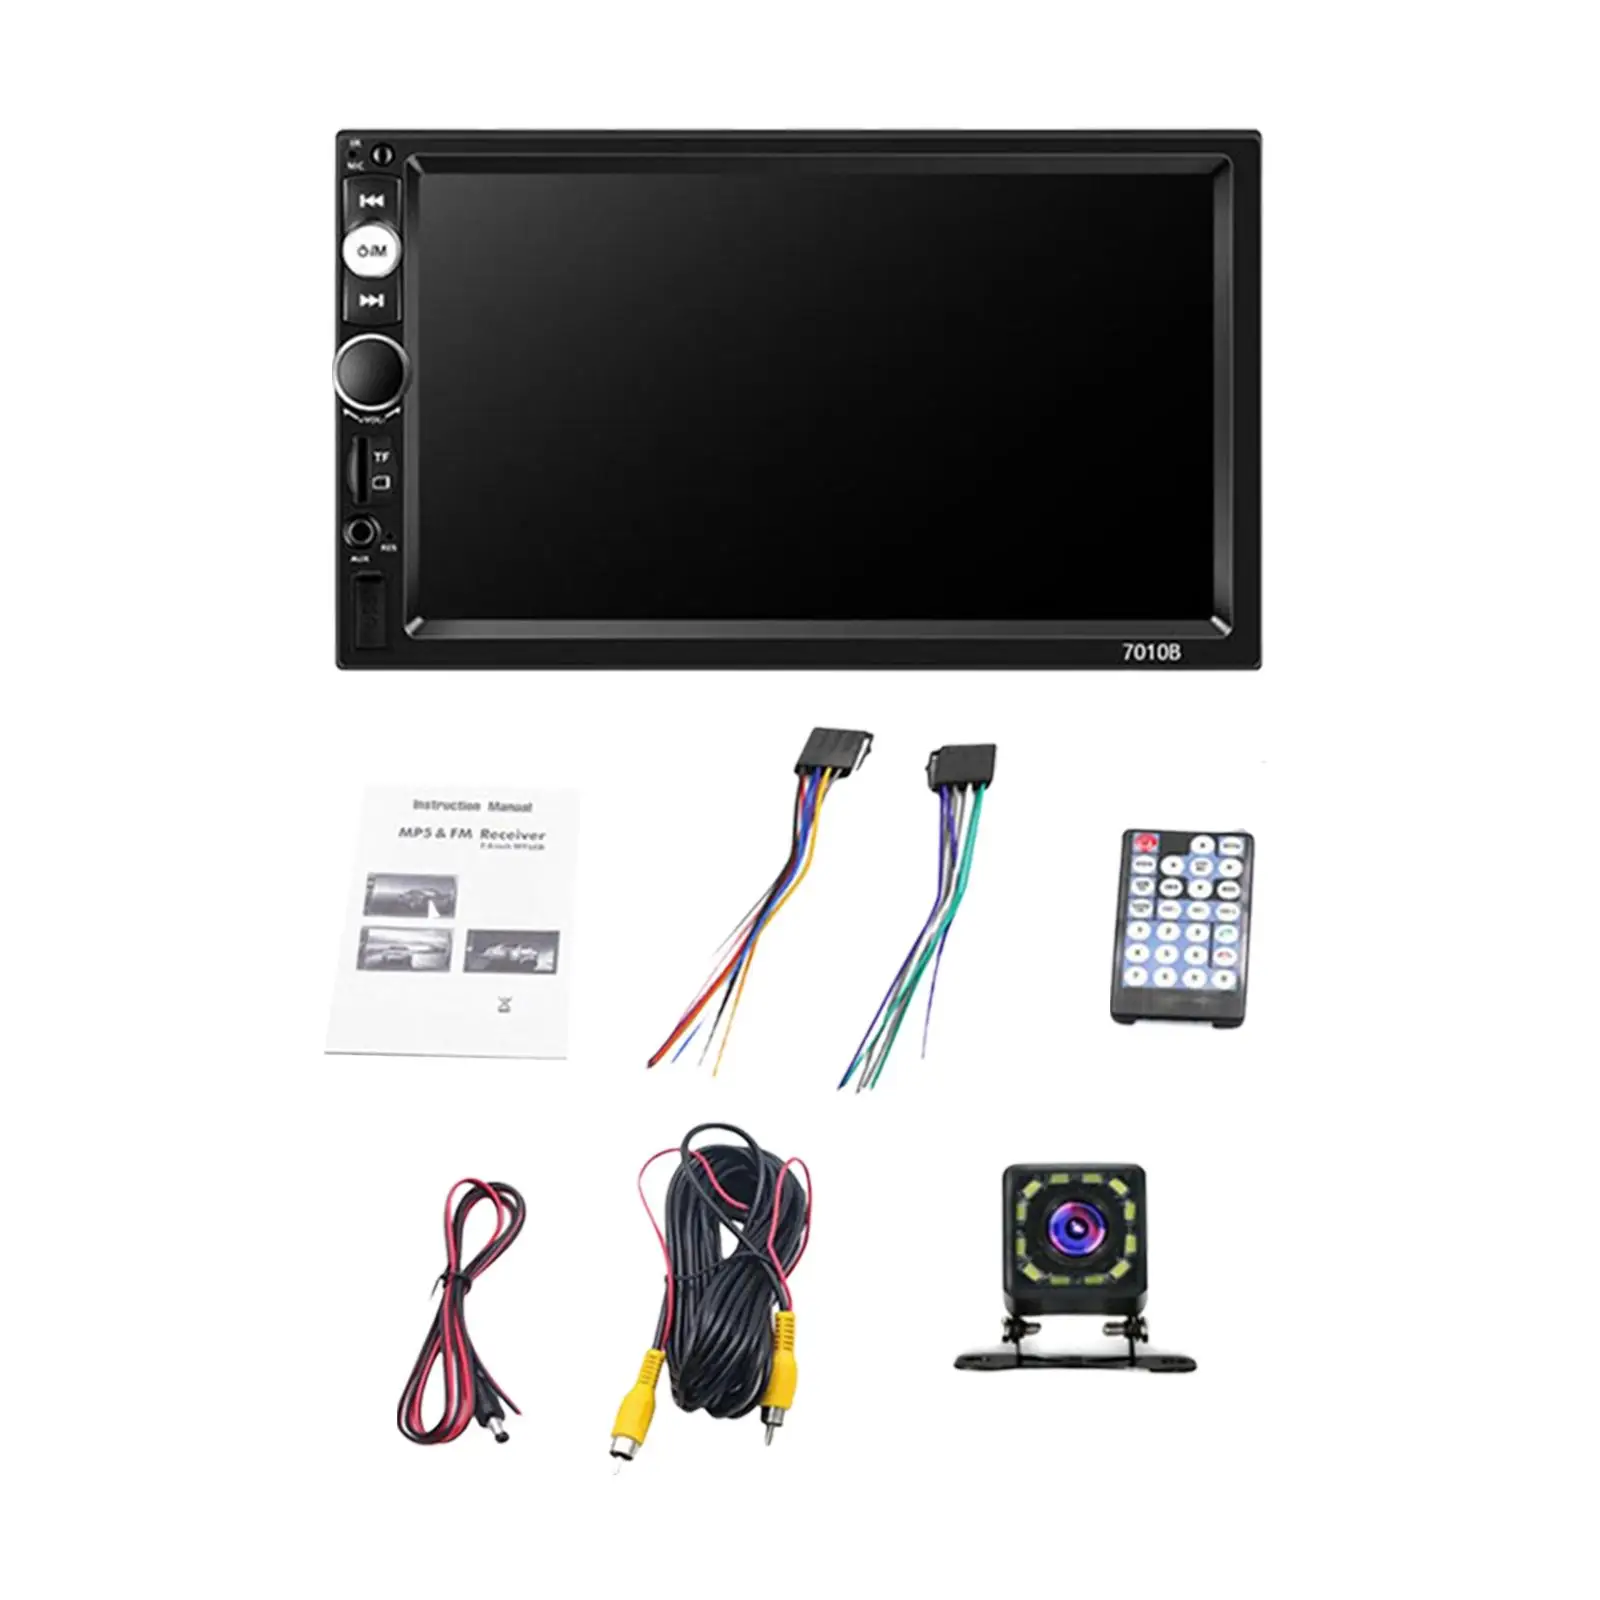 Professional Multimedia Player 7in Touchscreen for Automotive Trucks RV